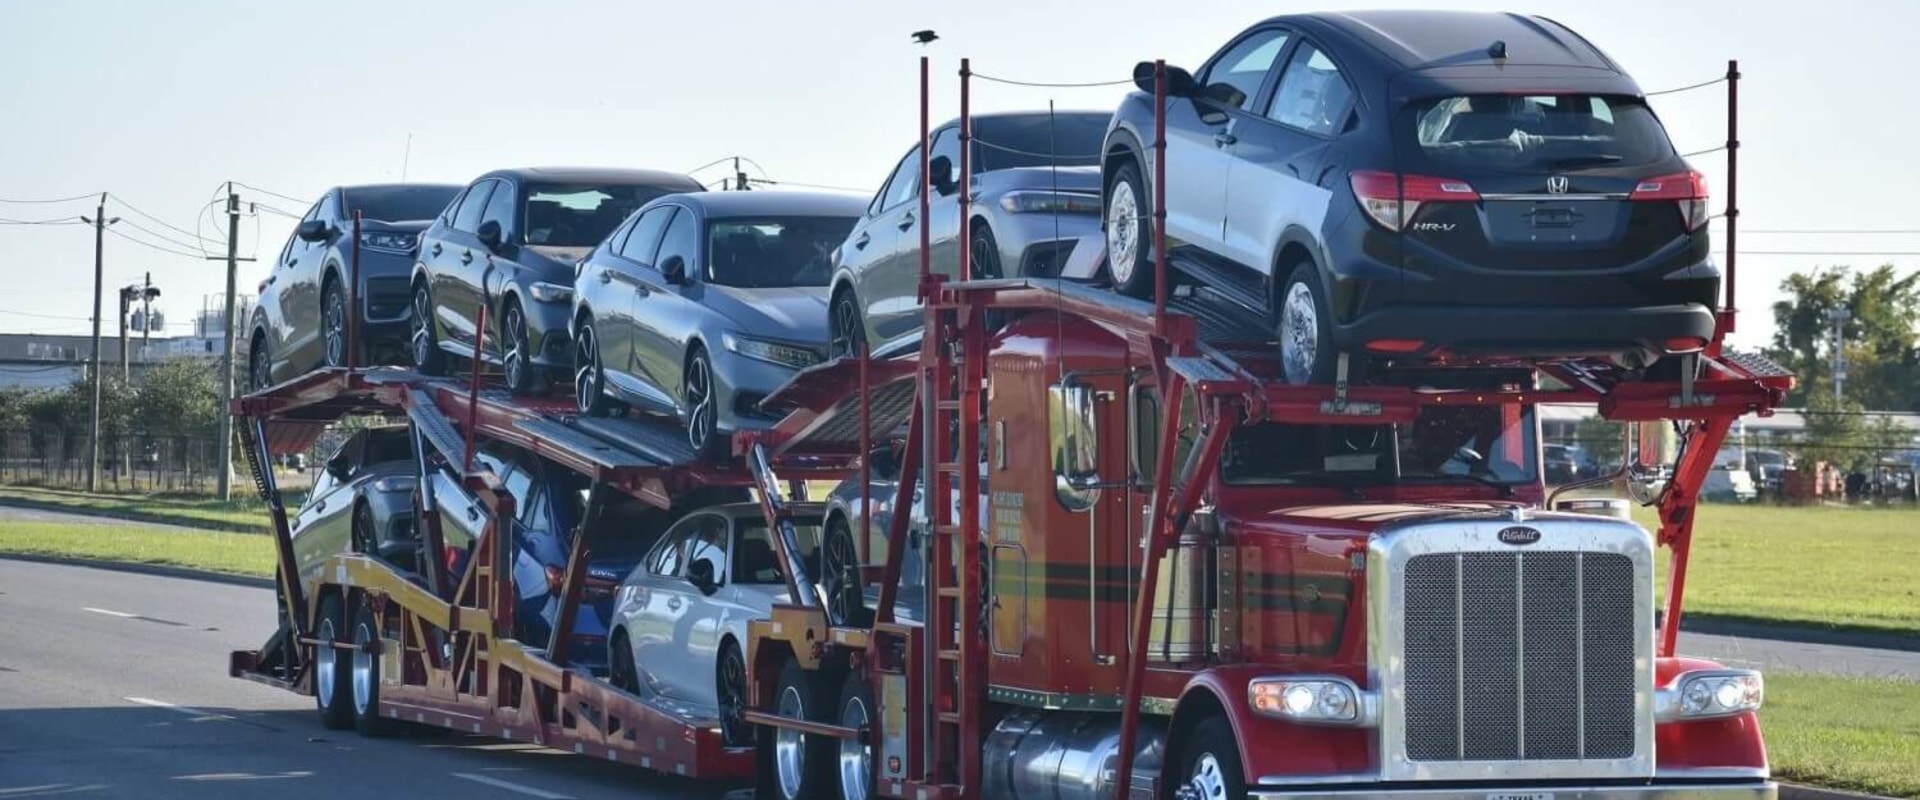 A1 Auto Transport - A Car Shipping Company With Over 30 Years Of Success